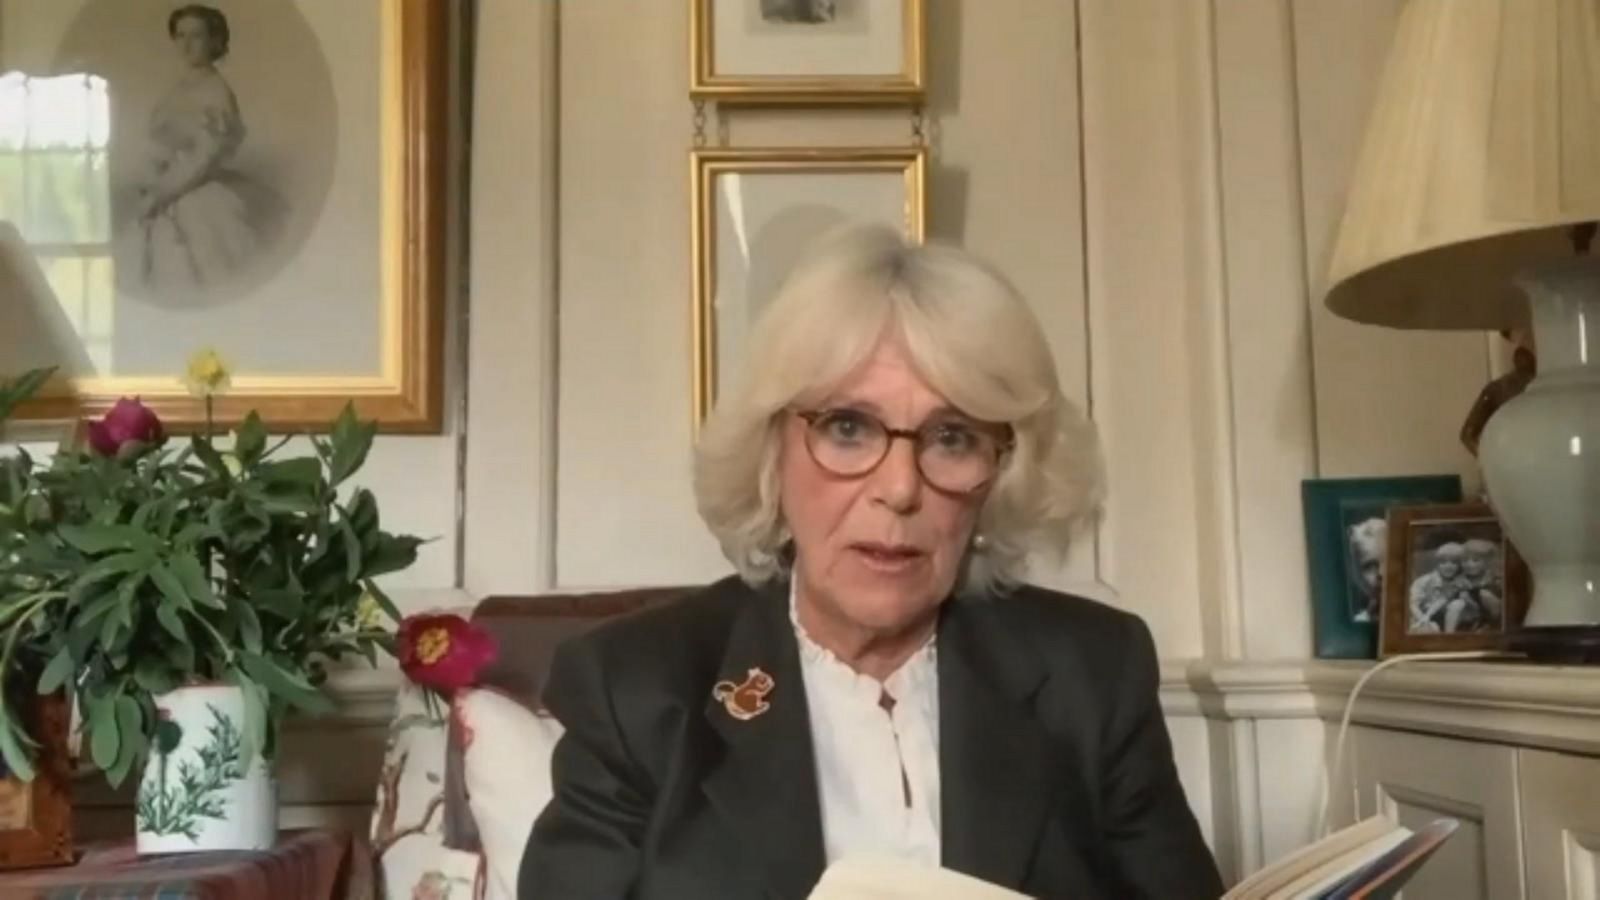 VIDEO: Camilla, Duchess of Cornwall, reads famous book for COVID-19 charity